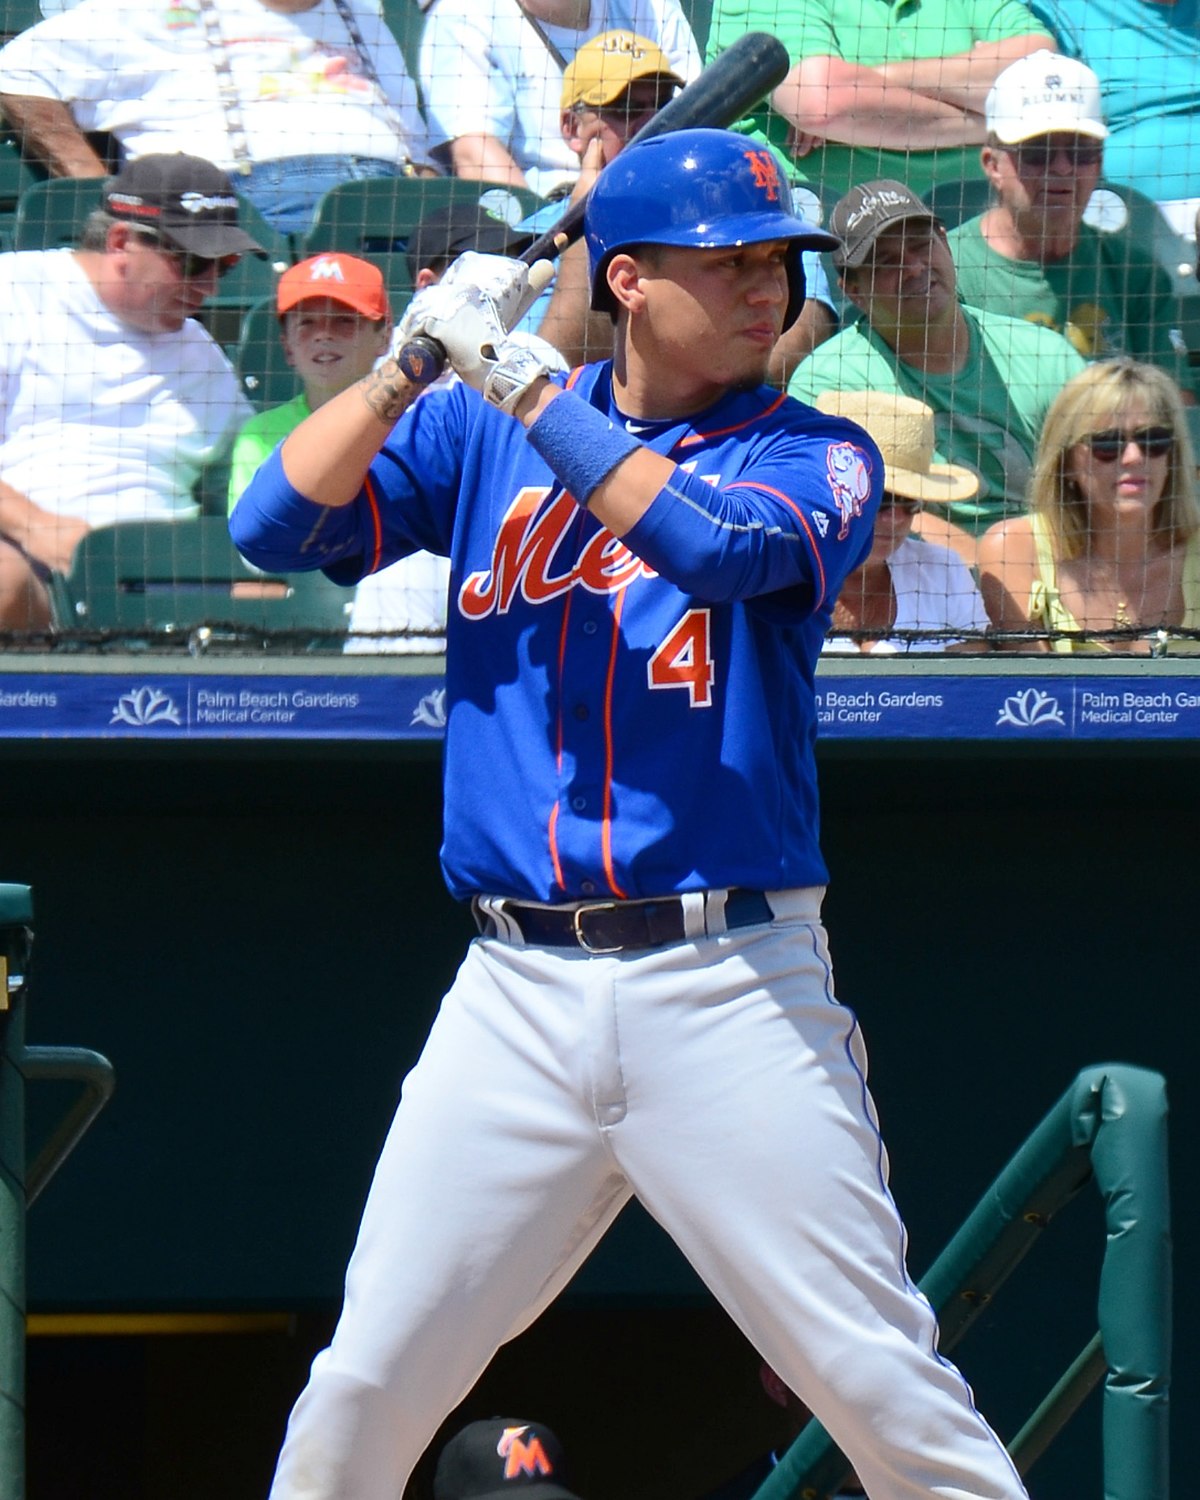 Road to Detroit] Wilmer Flores's brother Wilmer Flores has been